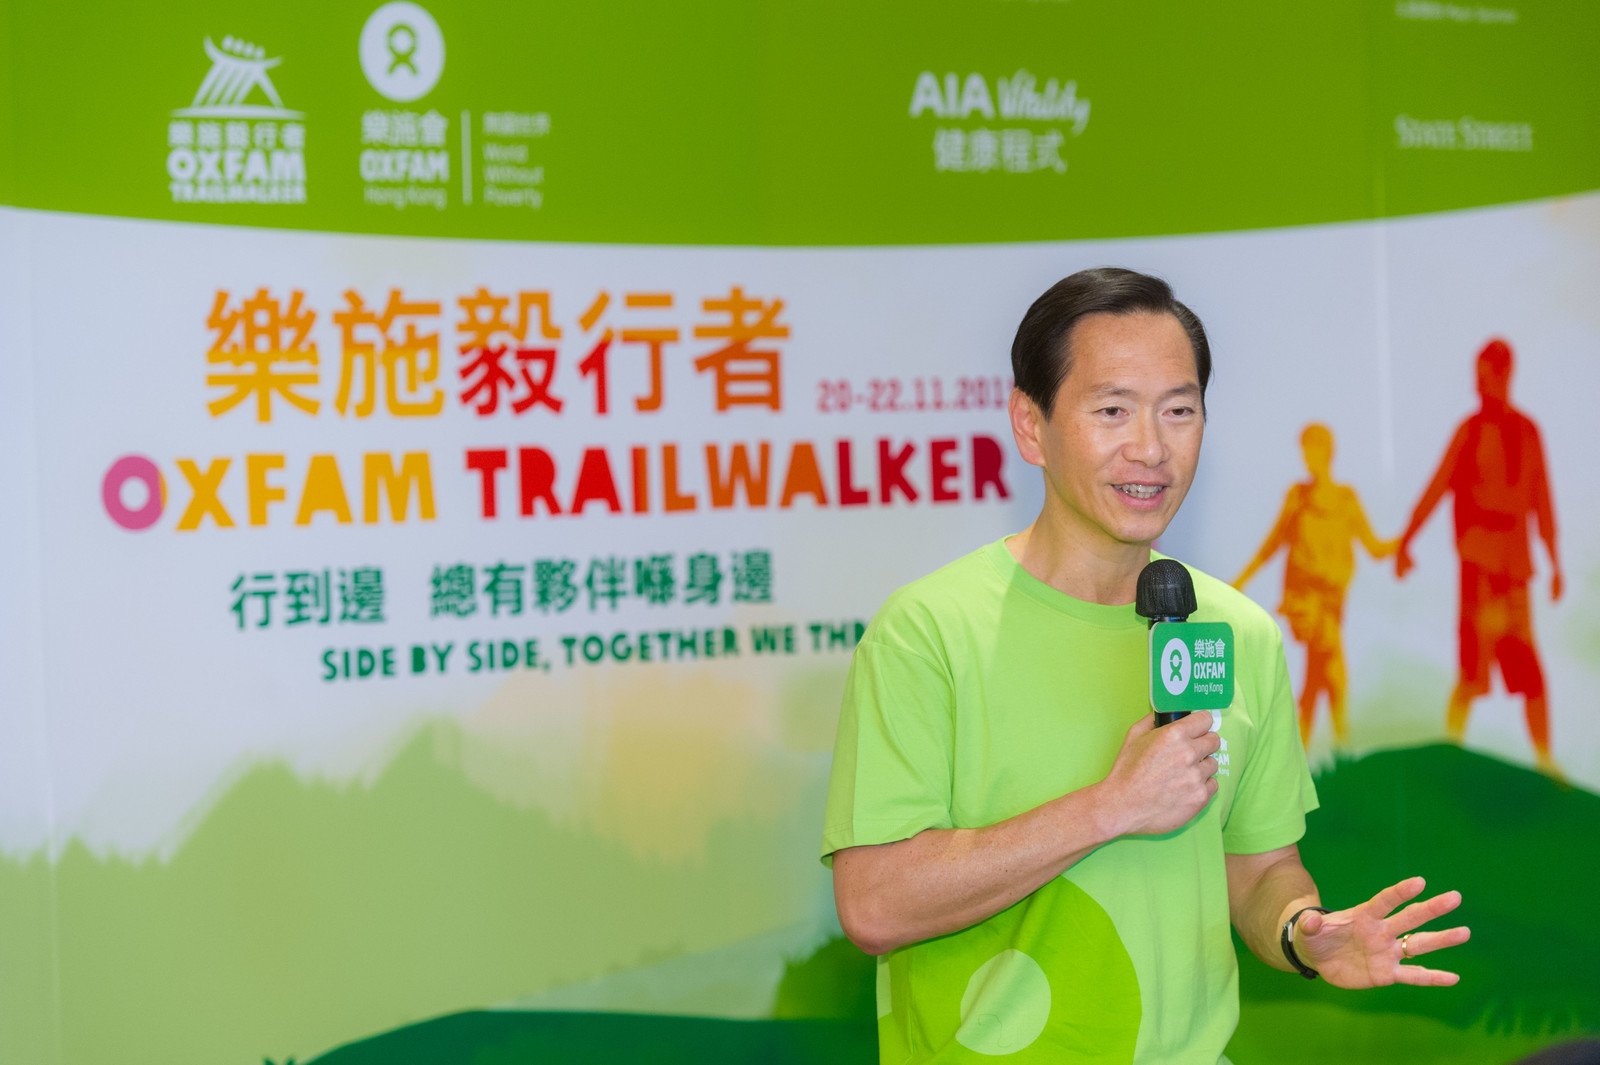 Bernard Chan, Chair of Oxfam Trailwalker Advisory Committee, gave an opening speech at the Oxfam Trailwalker 2015 press conference today